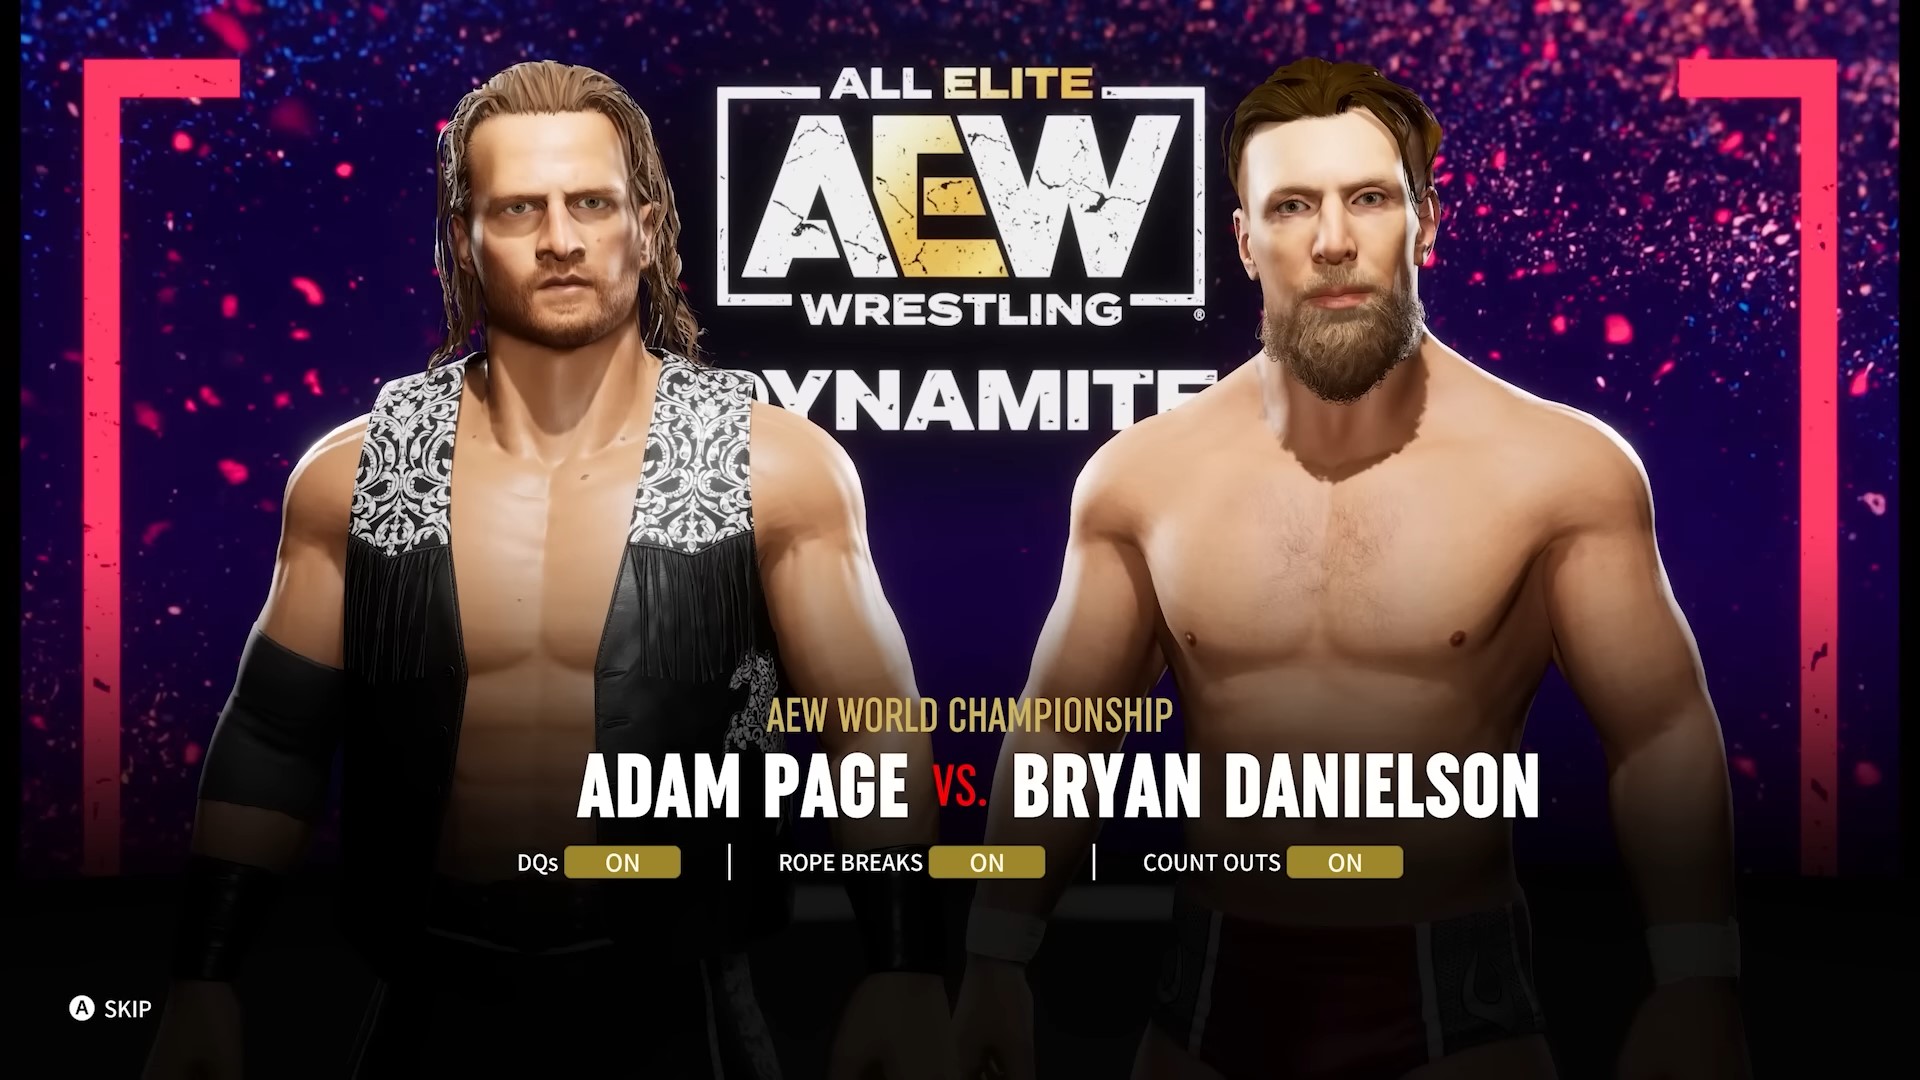 A To Gameplay New Issues Due Trailer Gets Fight A AEW: Avoids But Forever Ratings Date Release